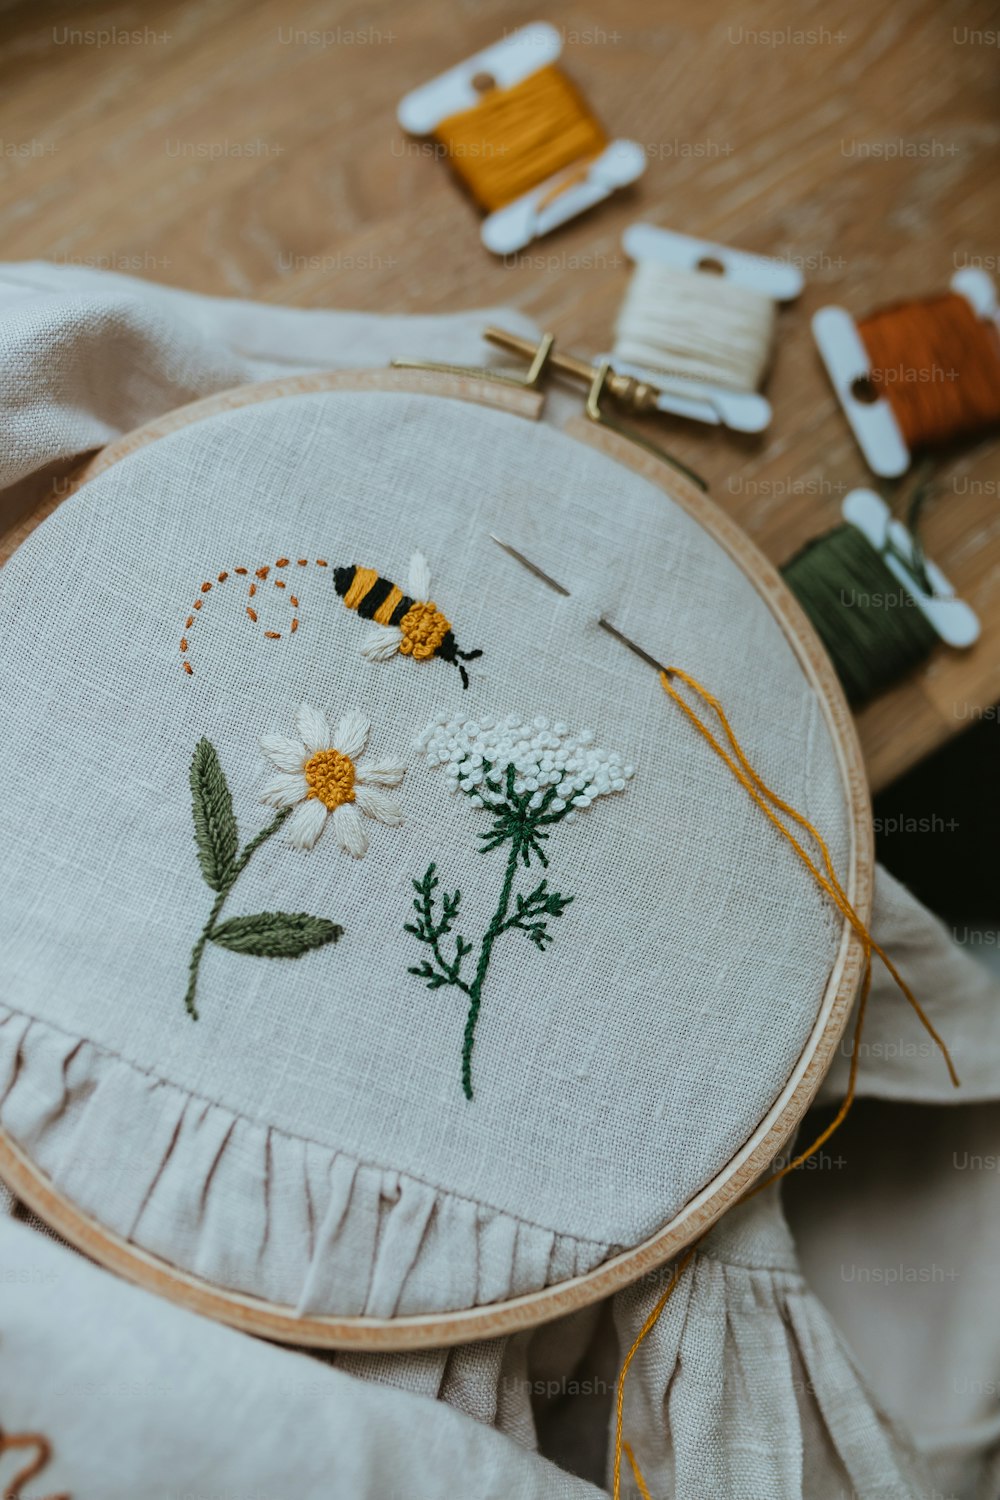 Embroidery Thread Pictures | Download Free Images on Unsplash